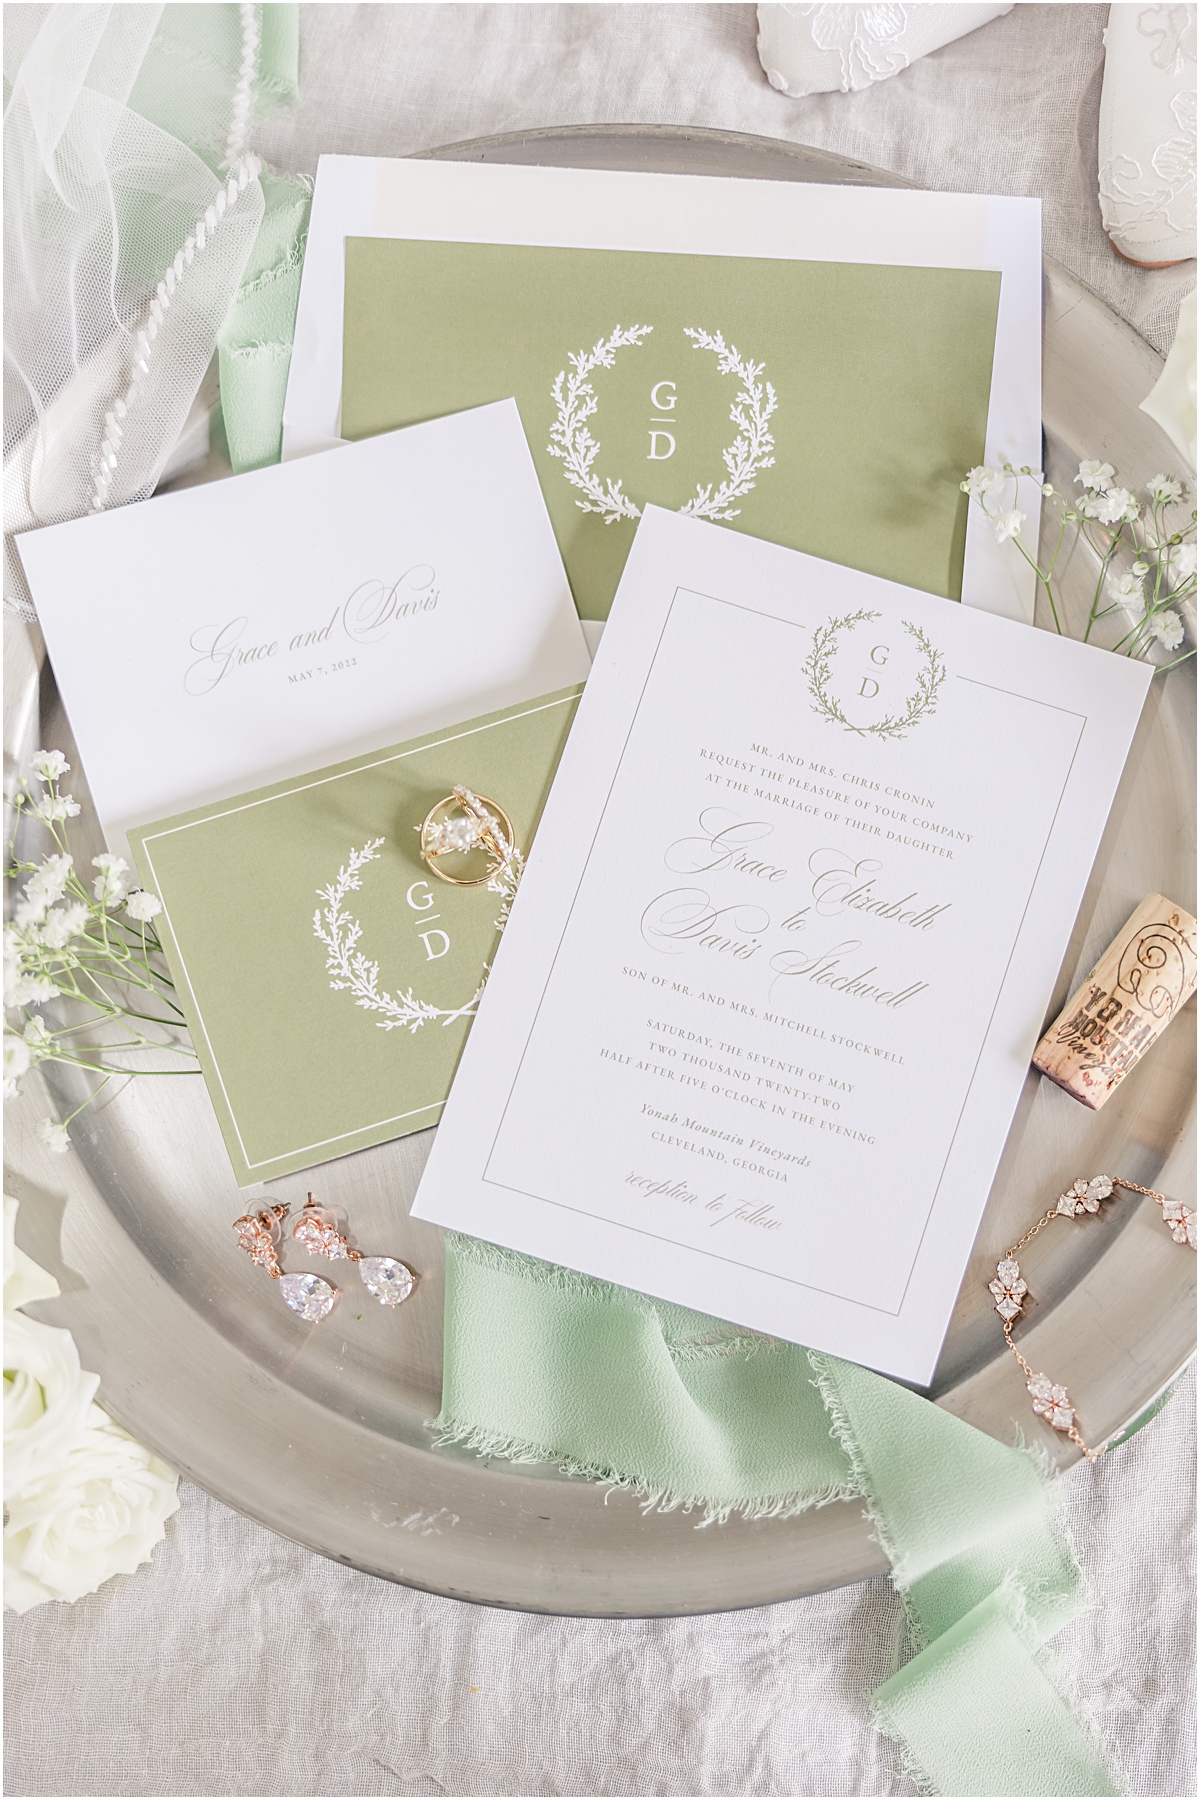 Wedding details including invitations and earrings